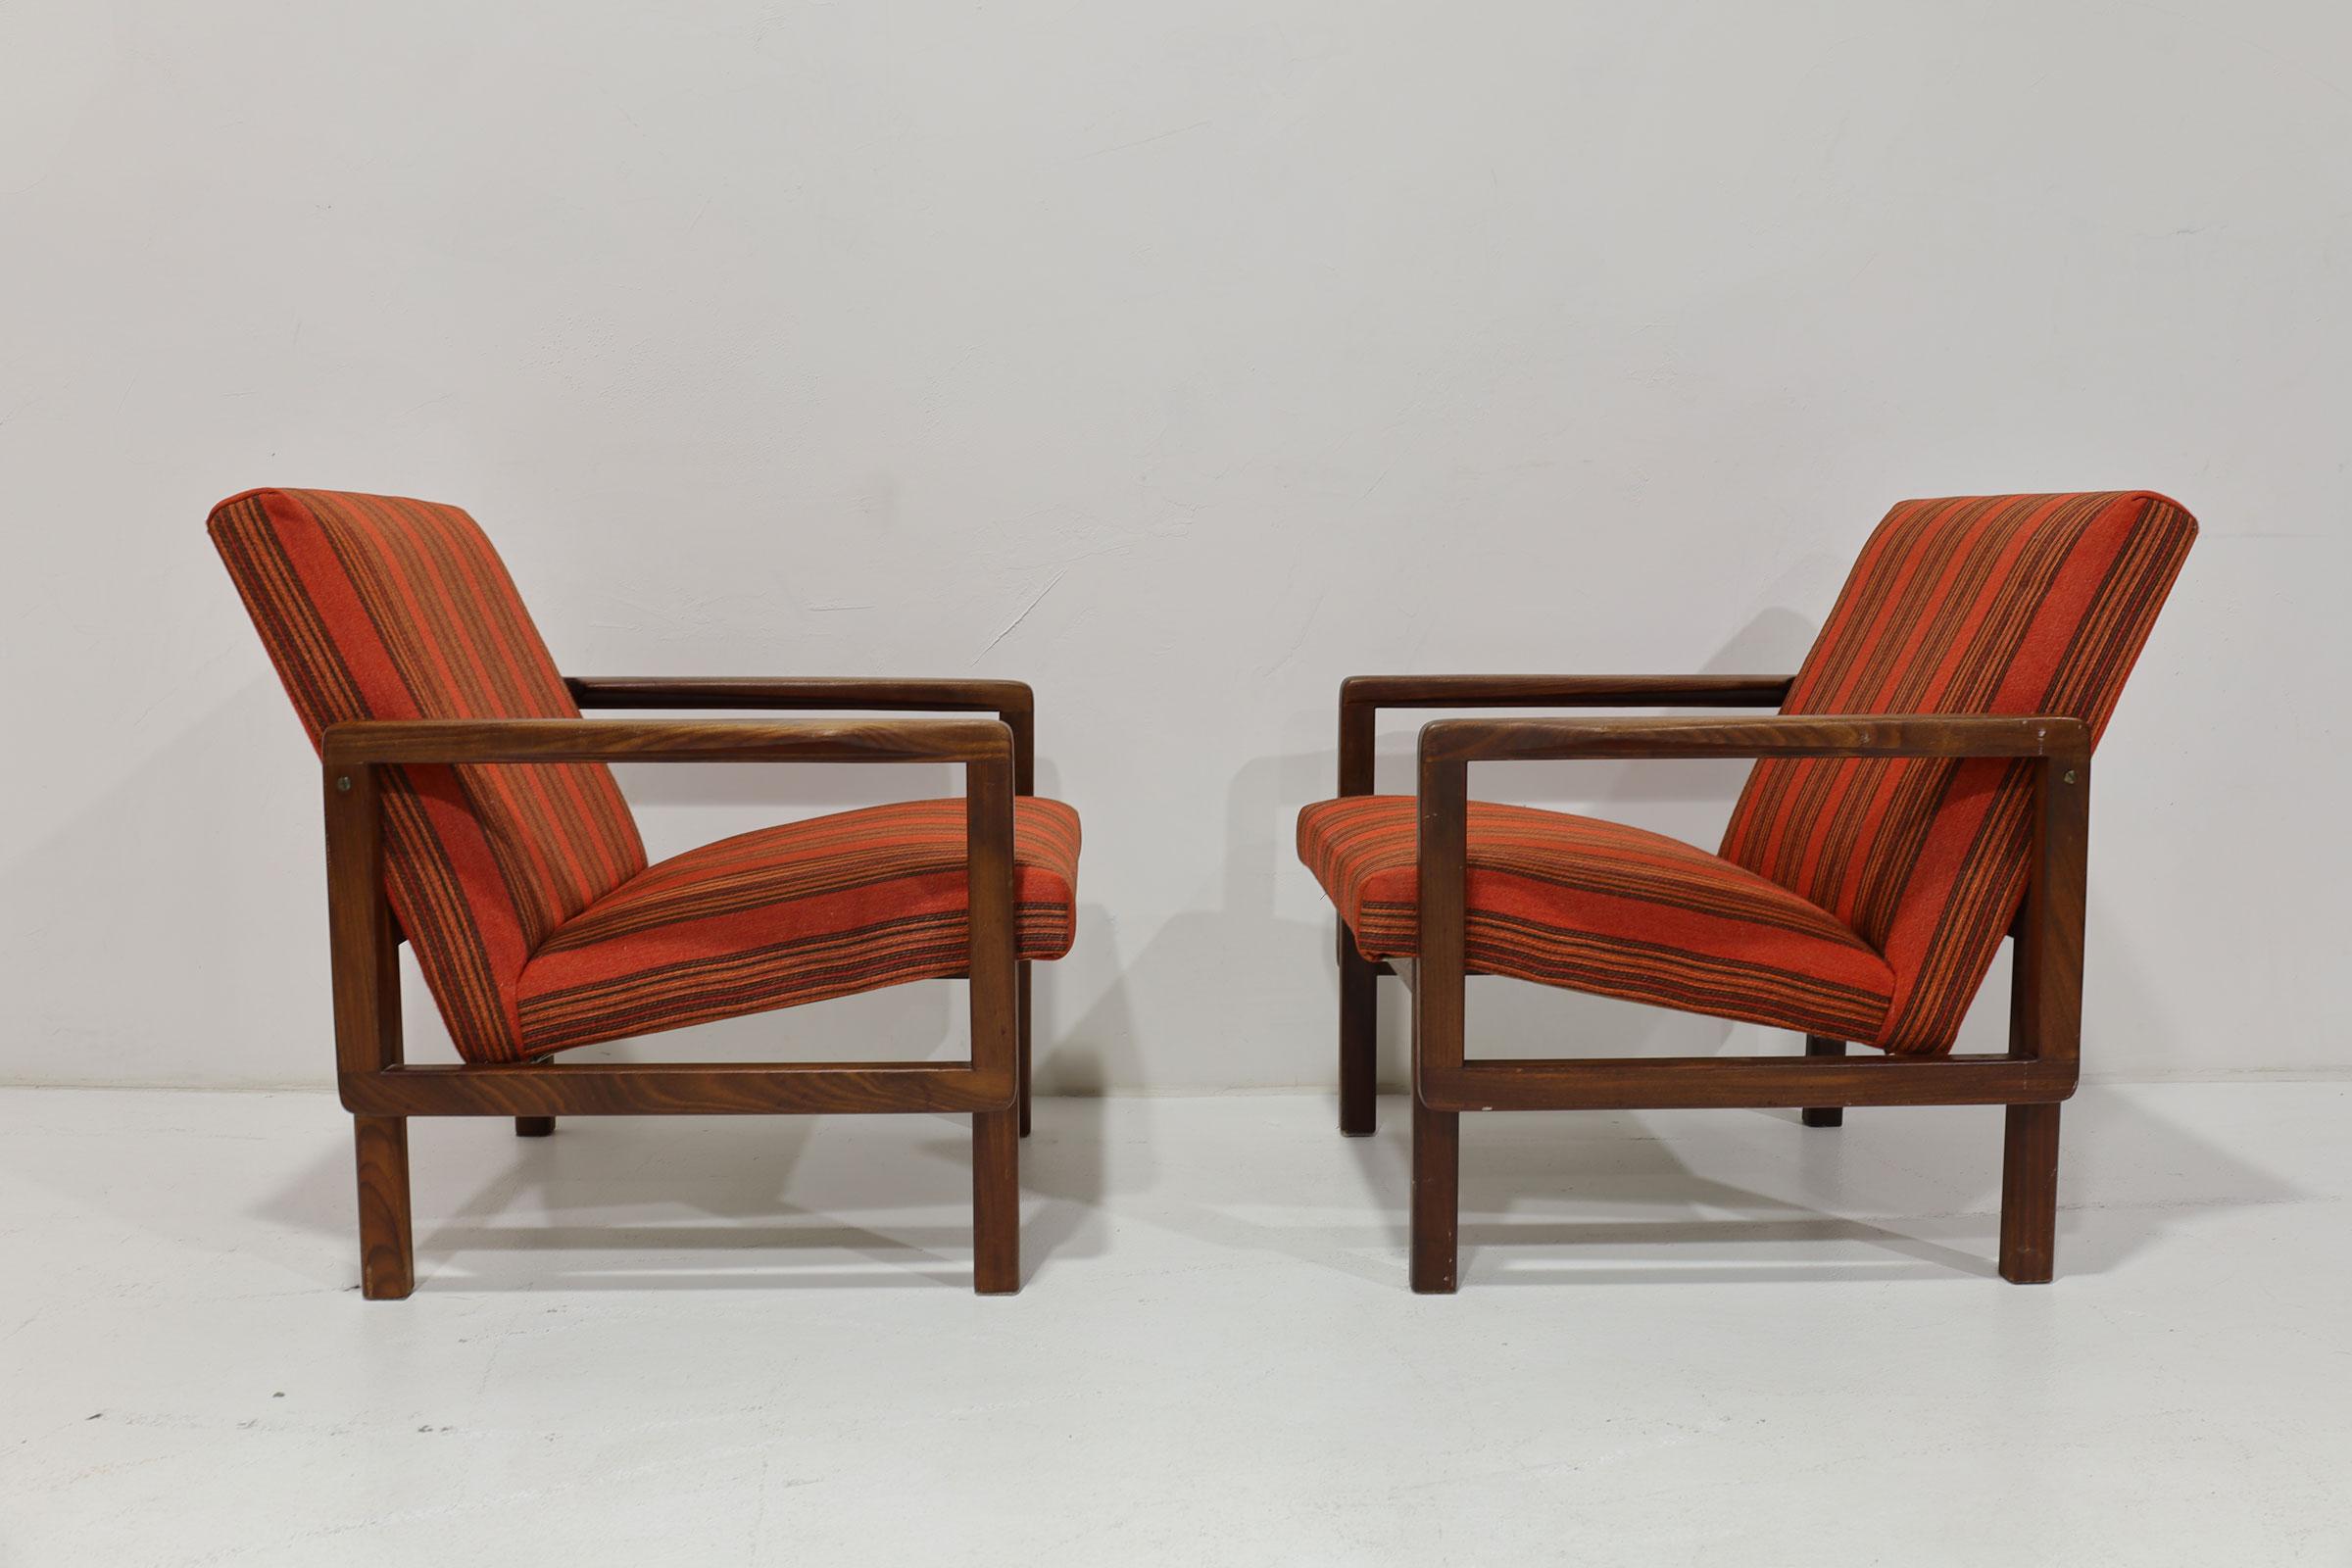 20th Century Aulis Leinonen Model 1416 Lounge Chairs in Teak and Upholstery, 1960s